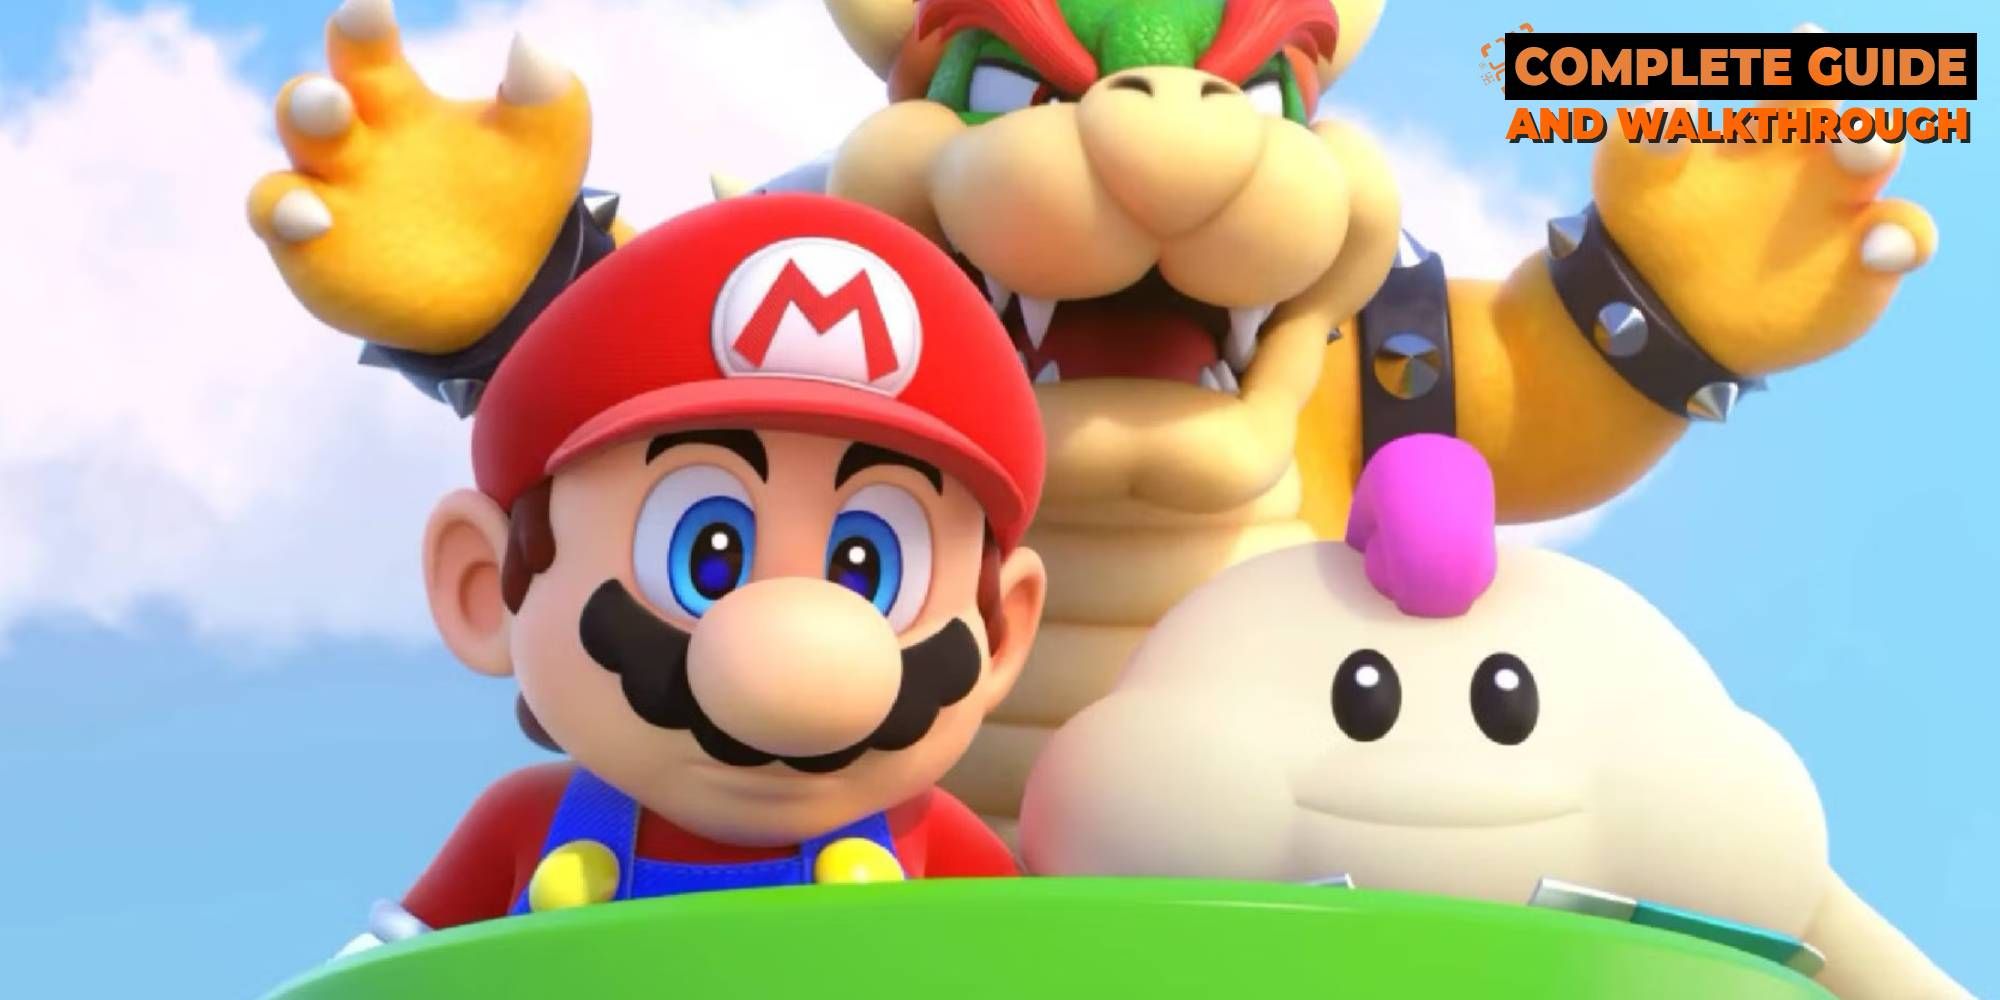 Mario, Bowser, and Mallow atop a pipe in Super Mario RPG preparing a triple attack.